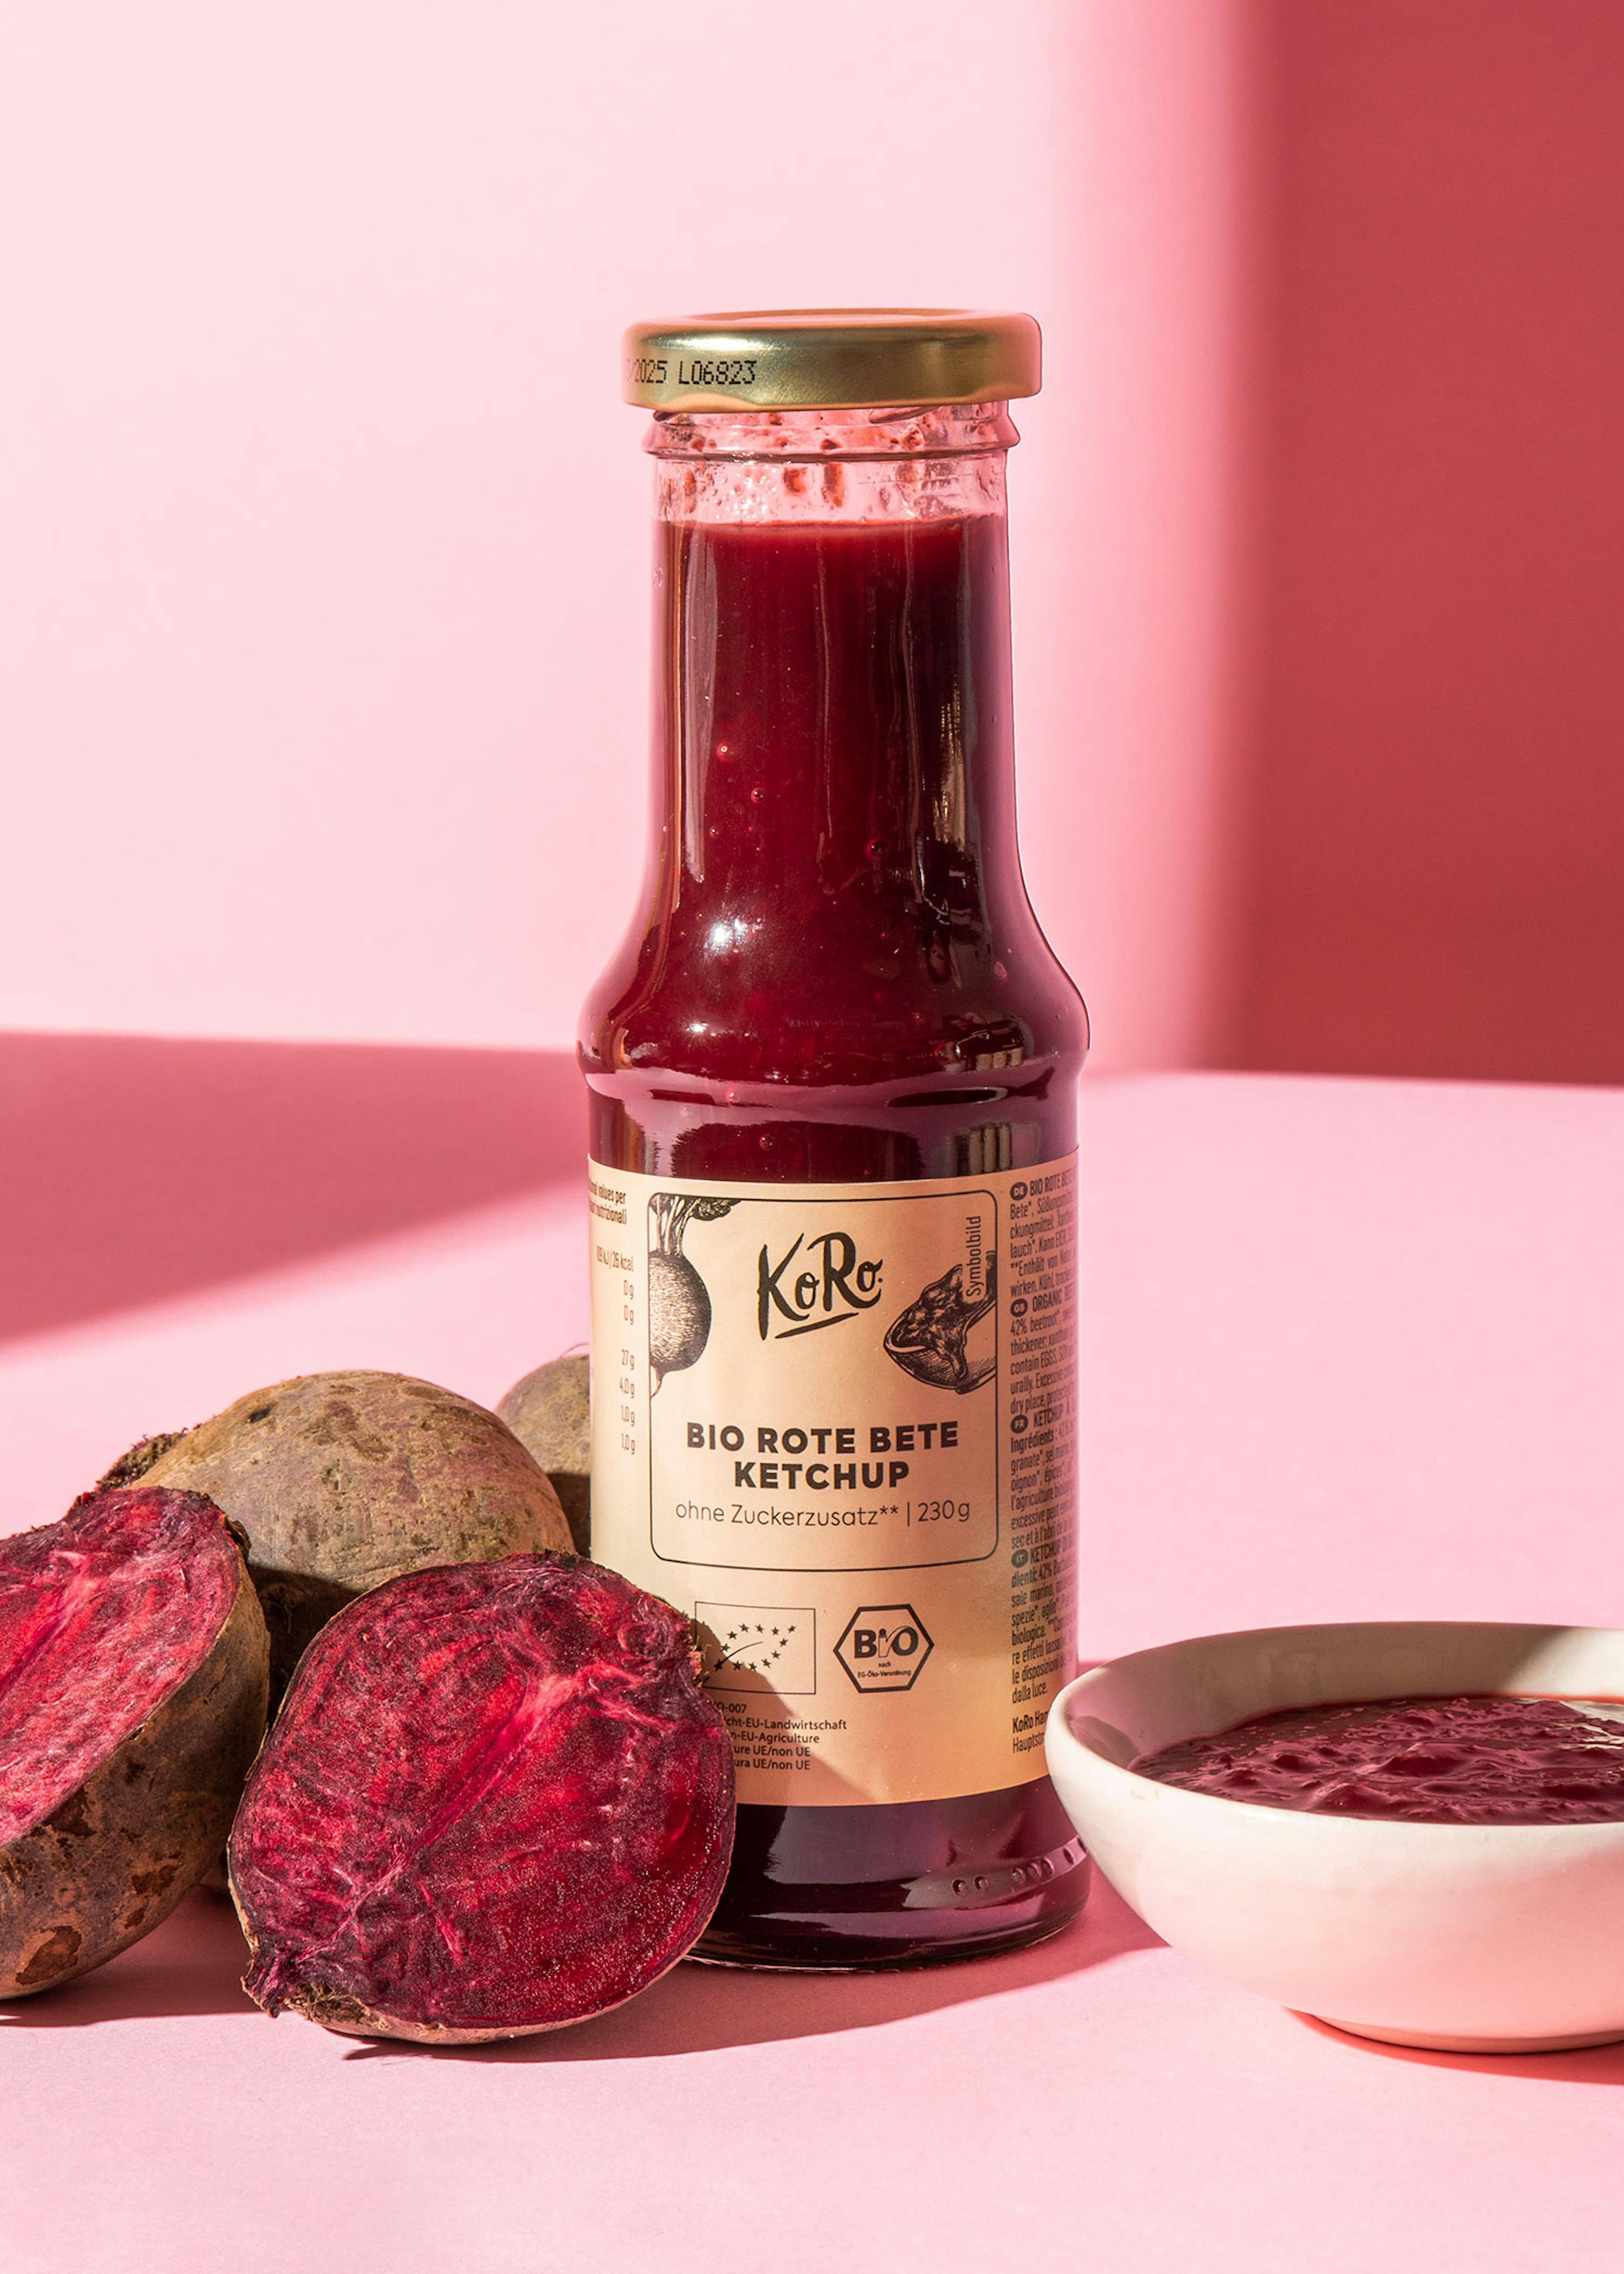 The tomato has competition: beet ketchup